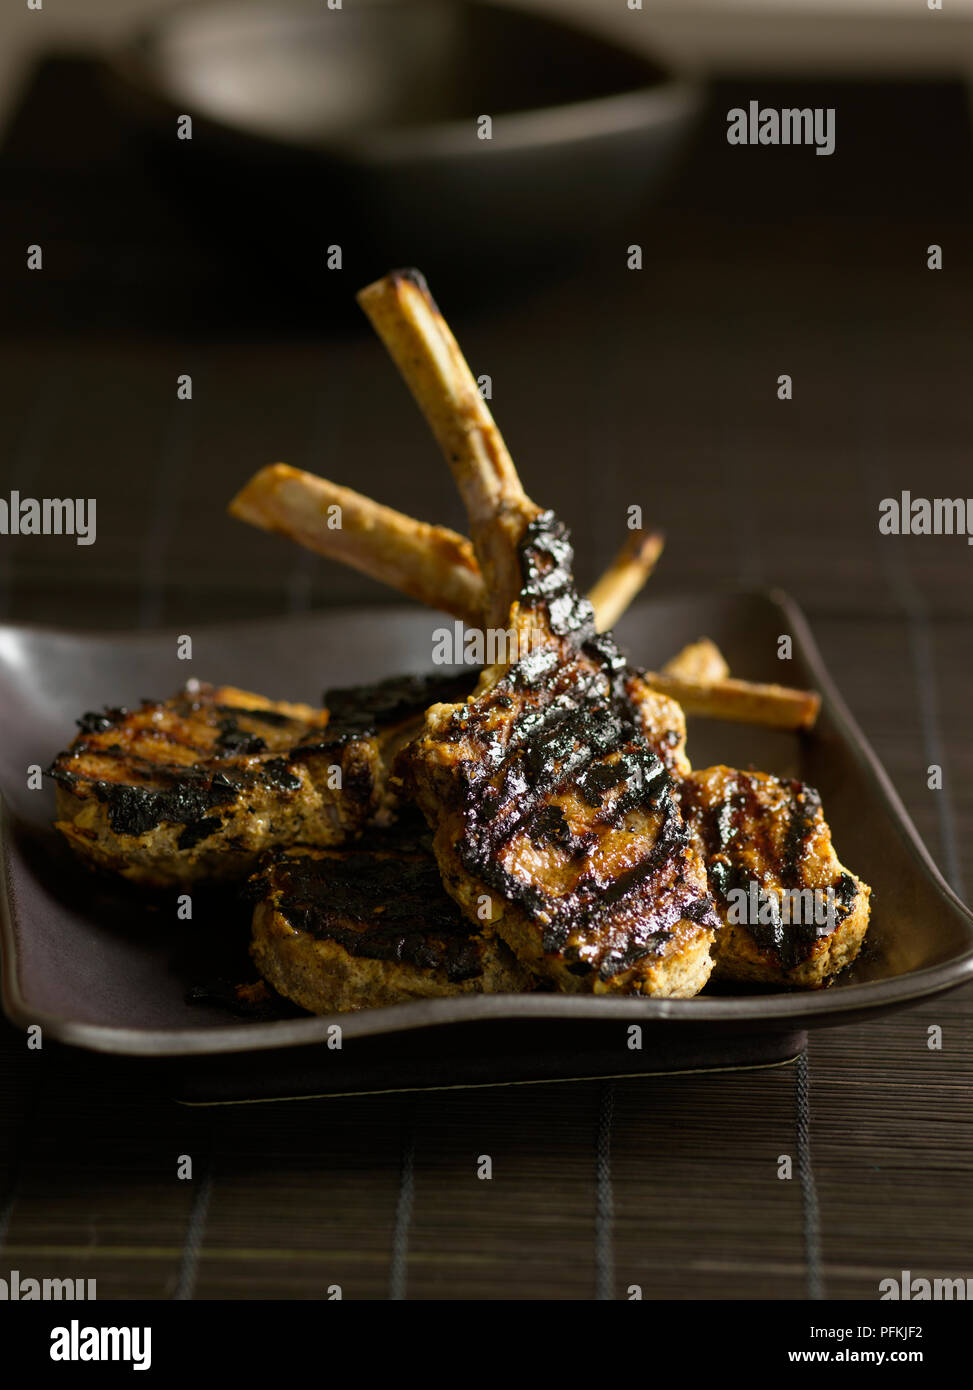 Lamb lollipops, marinated and grilled lamb rib chops, on brown plate Stock Photo